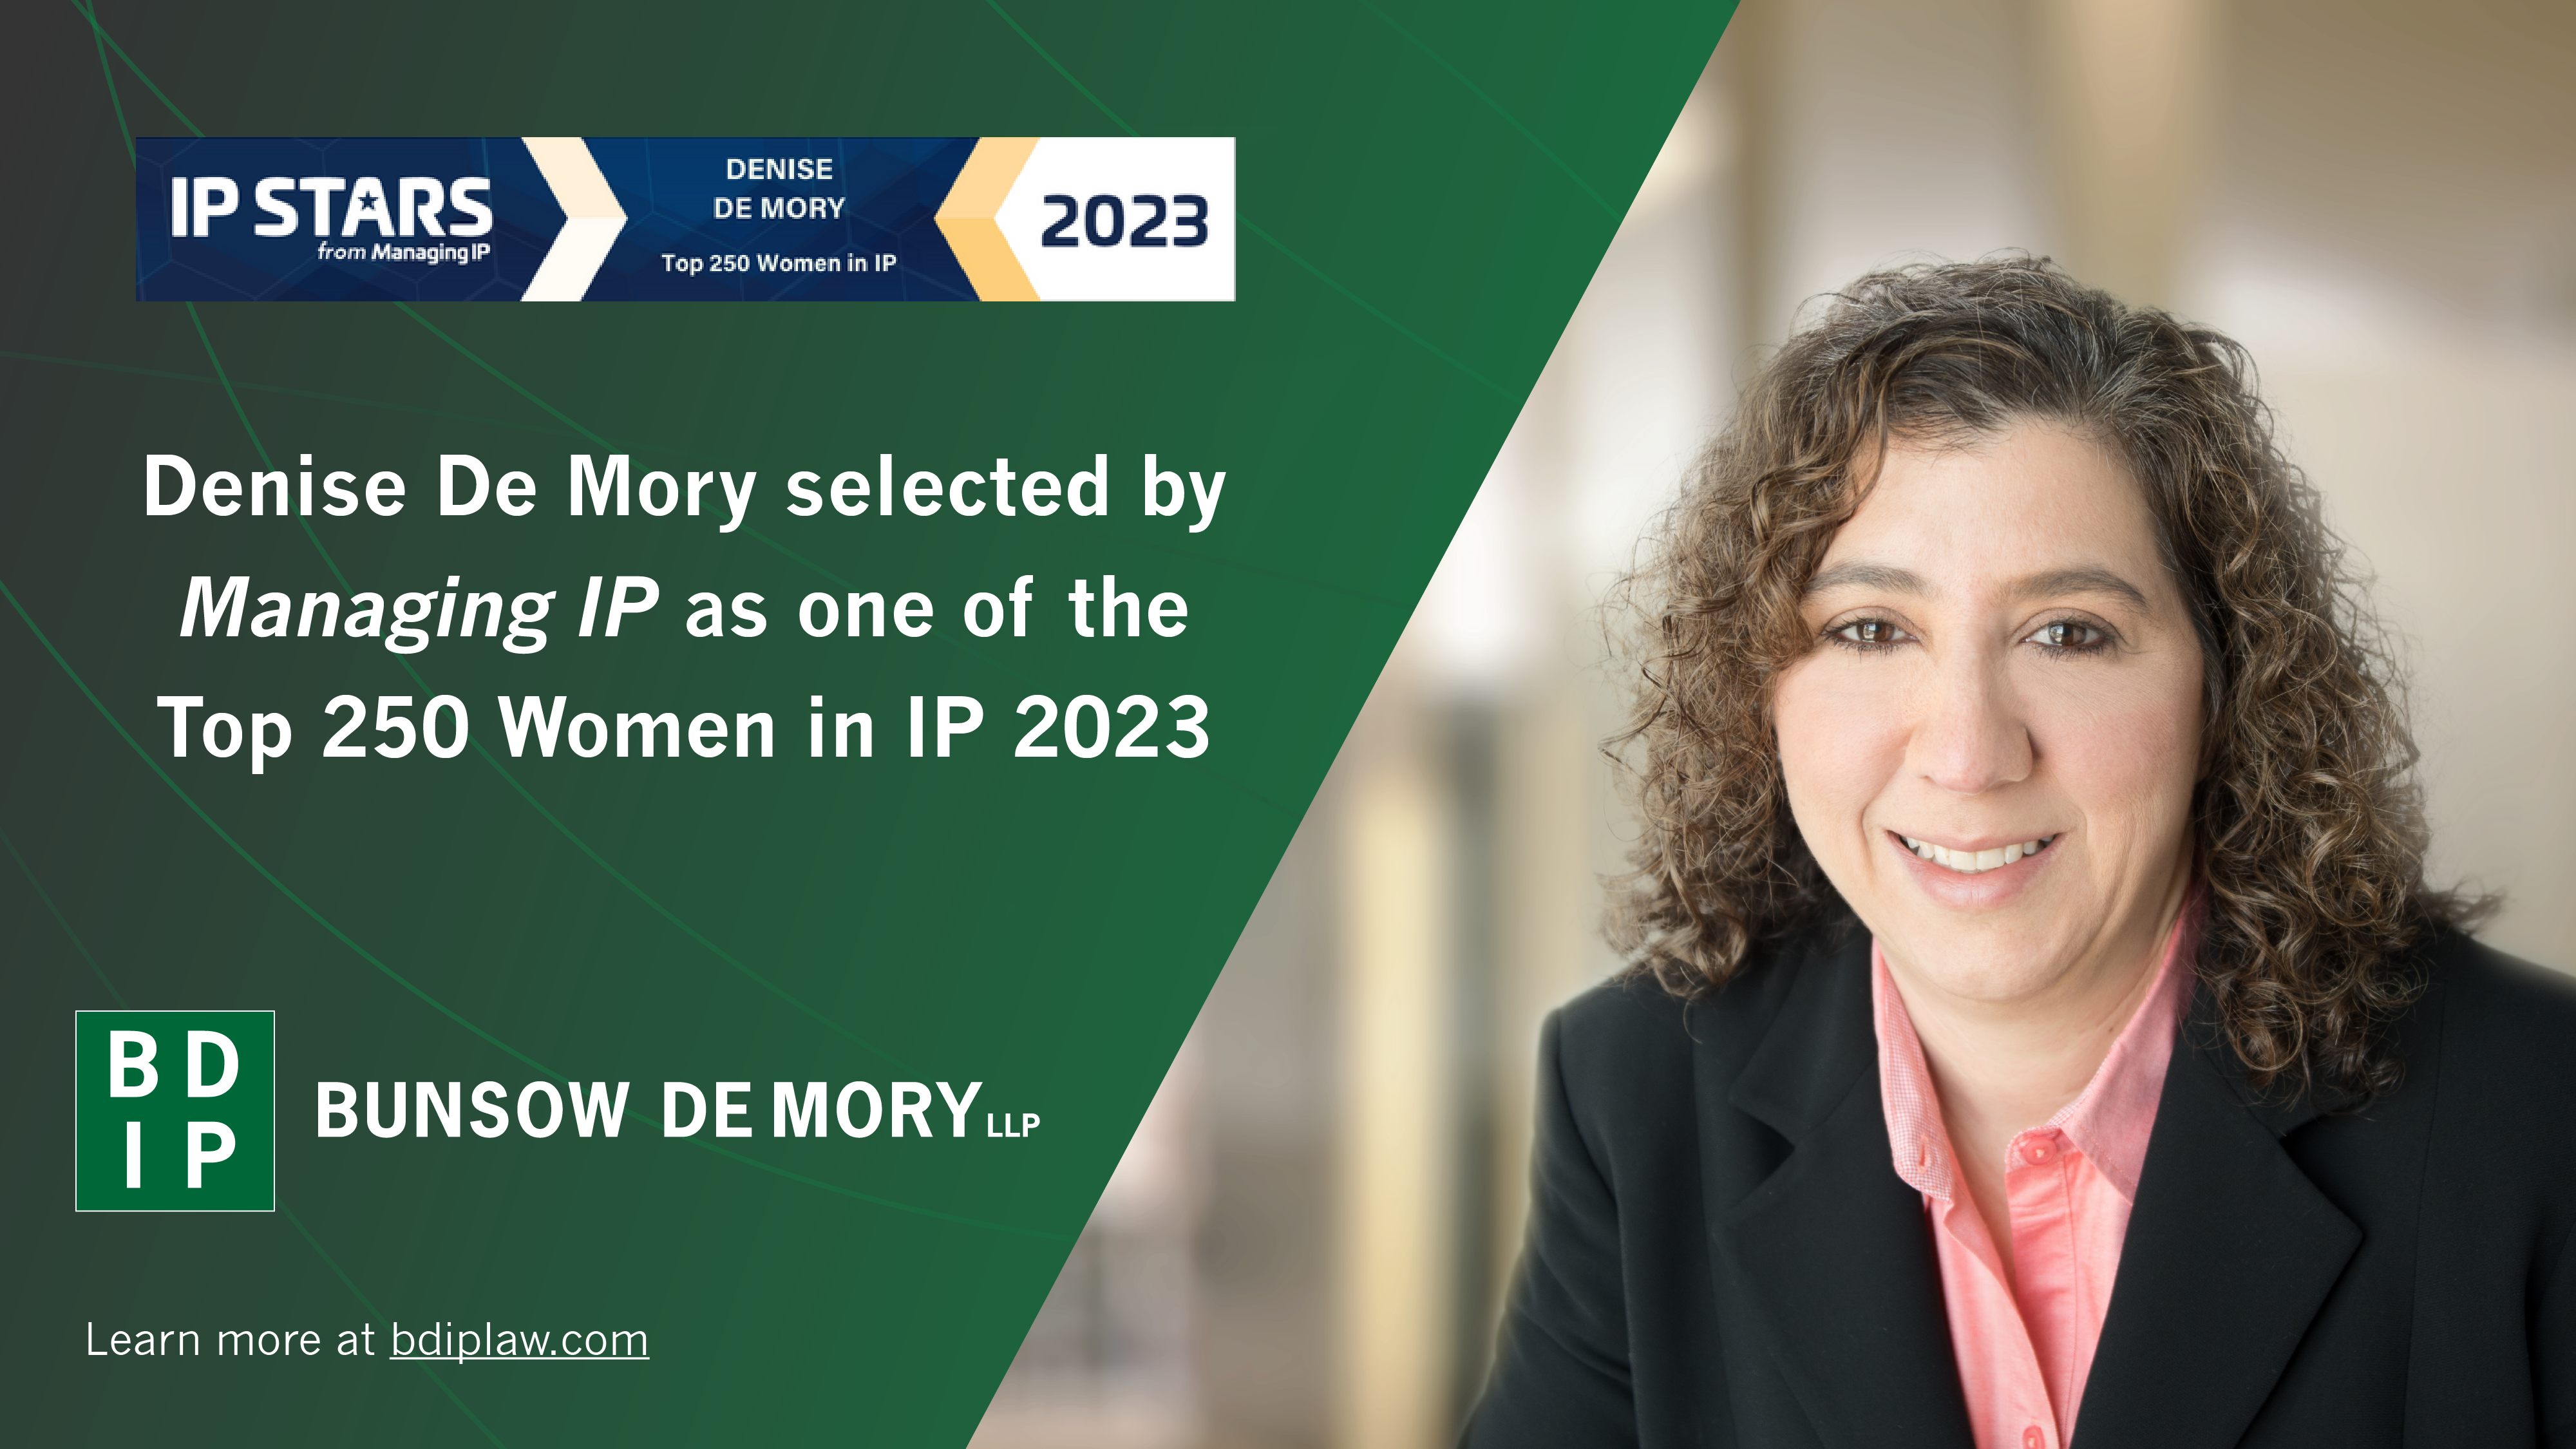 Denise De Mory Selected by Managing IP as One of the Top 250 Women in IP 2023